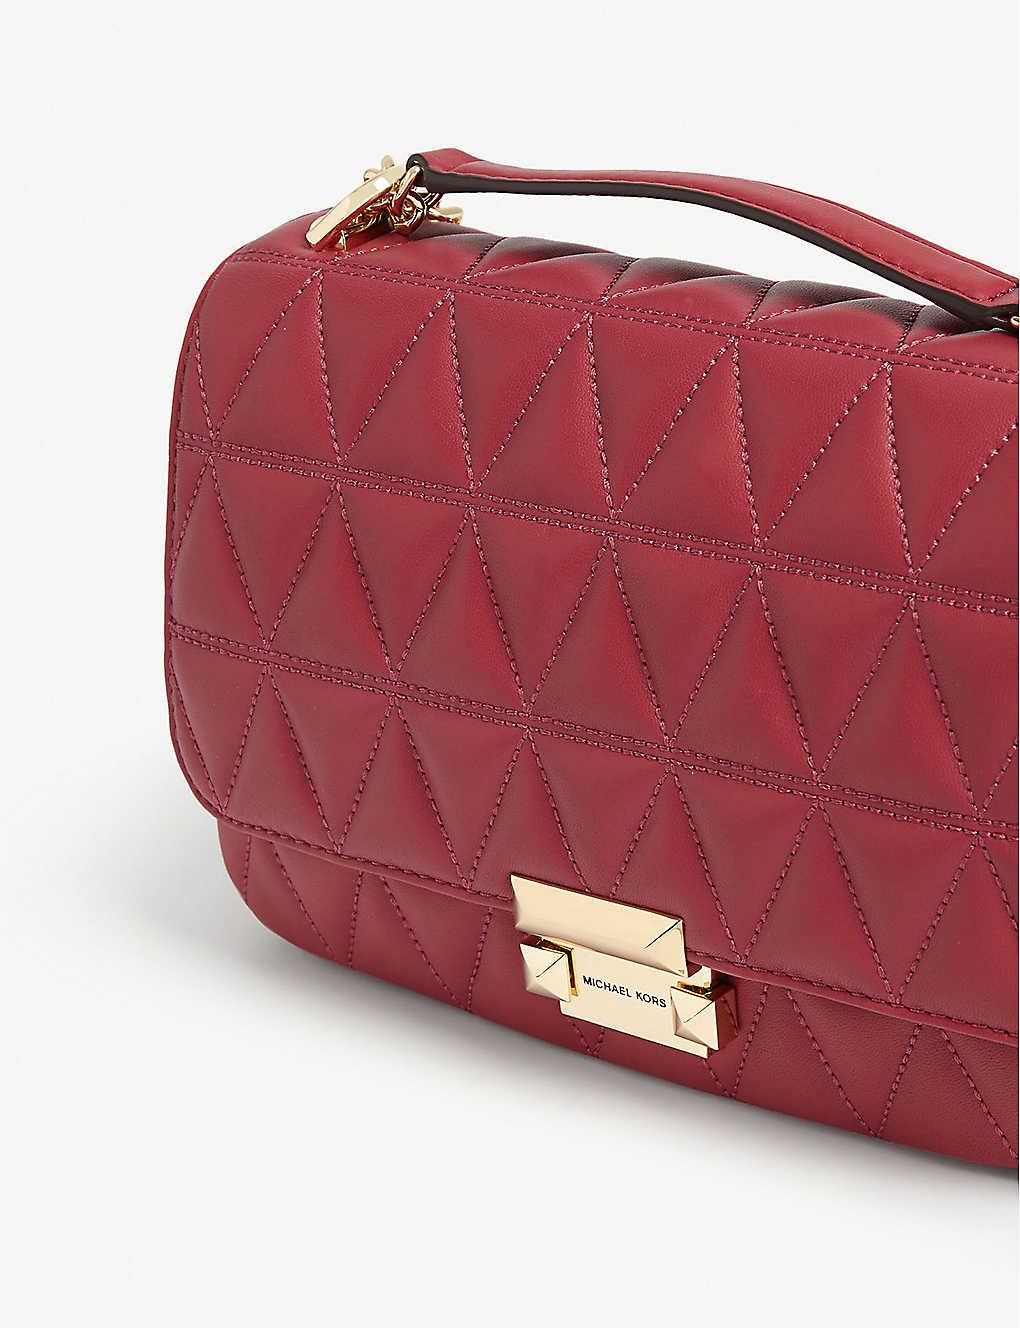 MICHAEL Michael Kors Sloan Large Quilted Leather Bag in Red | Lyst